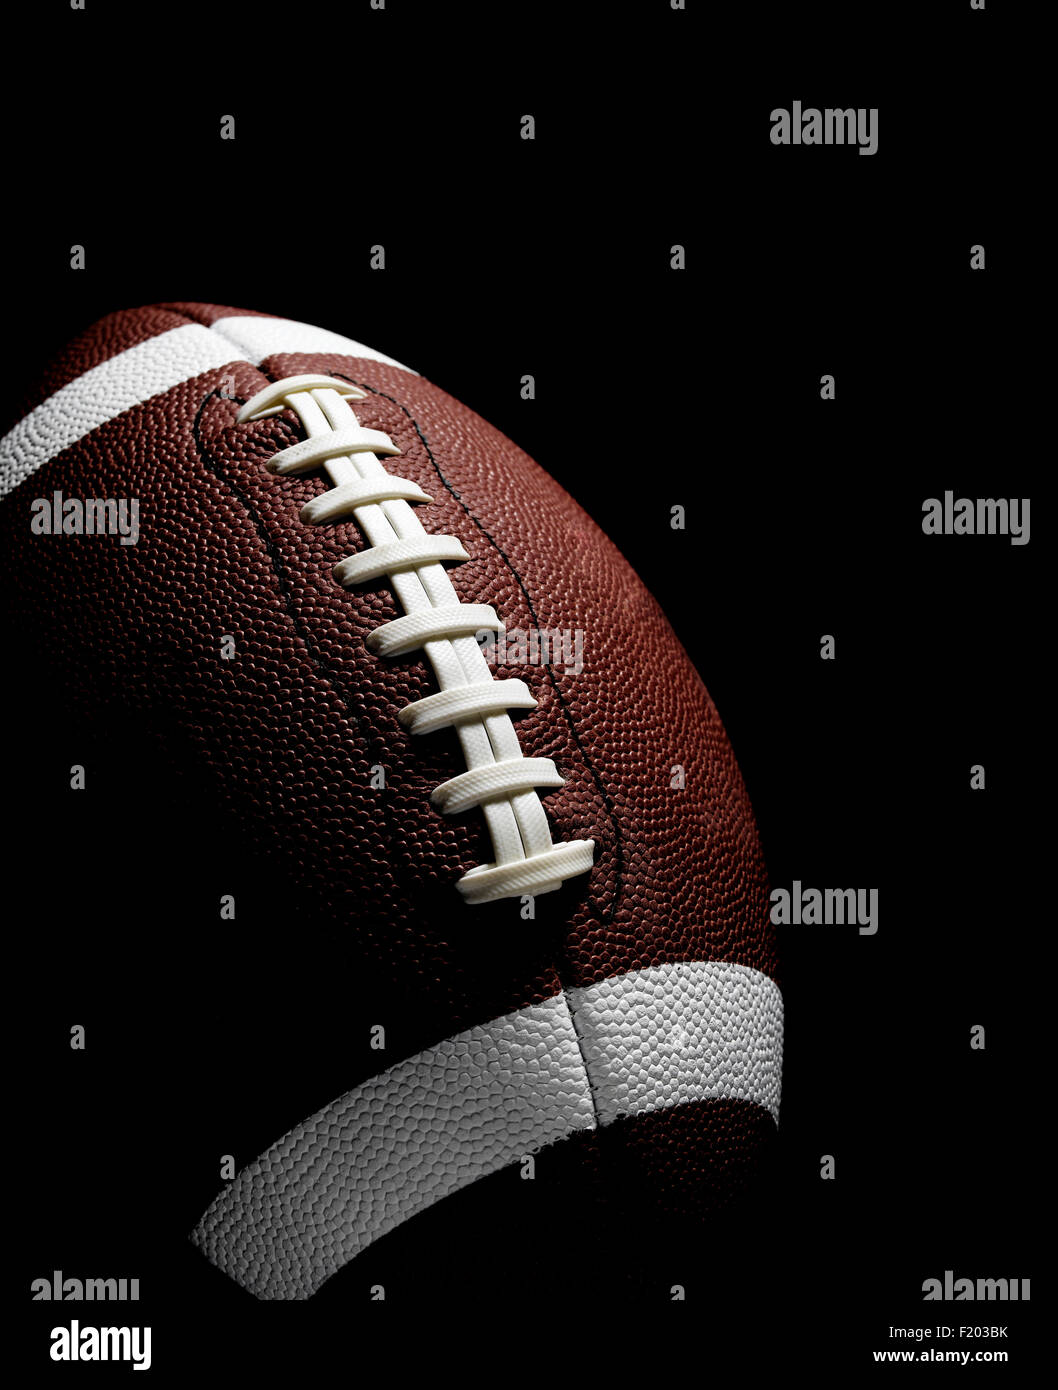 Isolated American football in a black background Stock Photo